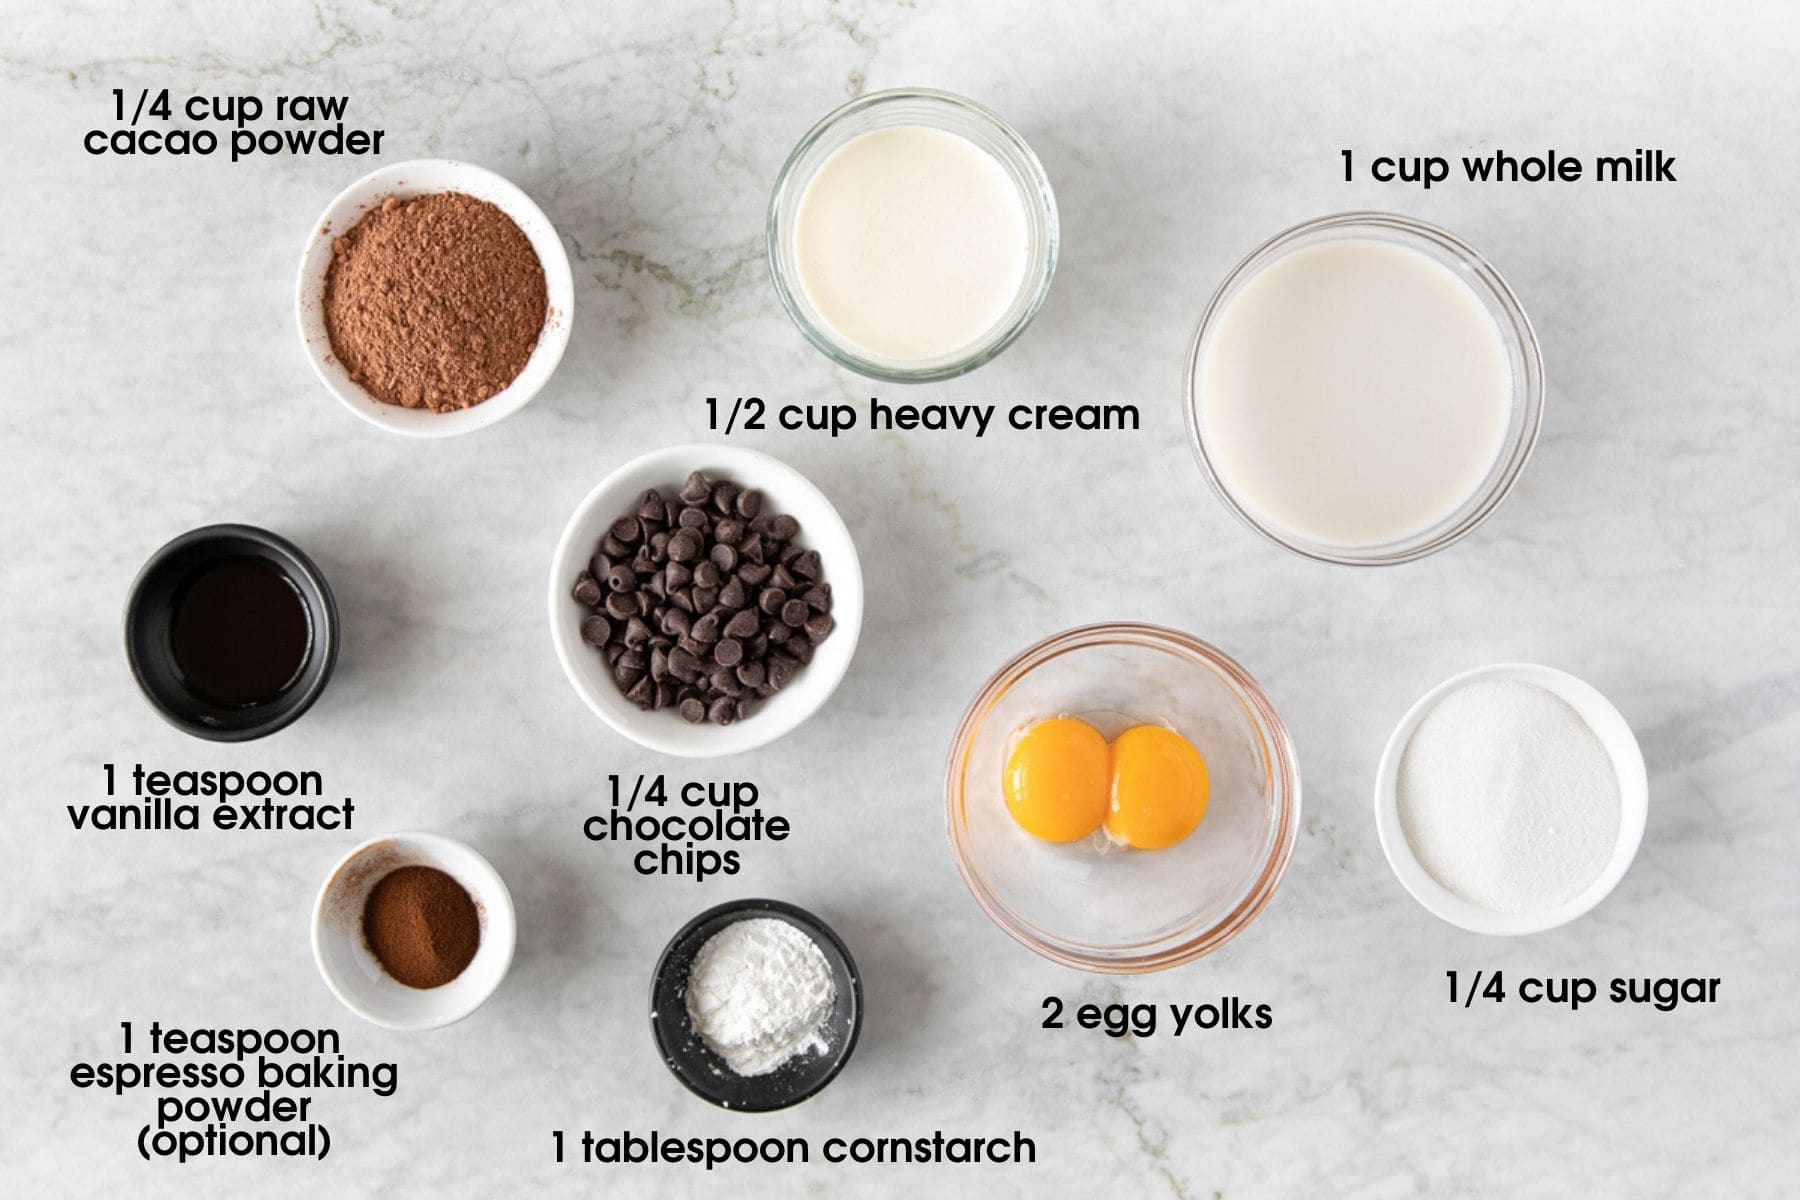 Photo of ingredients to make double-chocolate pudding (budino) including cacao powder, heavy cream, whole milk, sugar, egg yolks, cornstarch, espresso powder, vanilla extract and chocolate chips